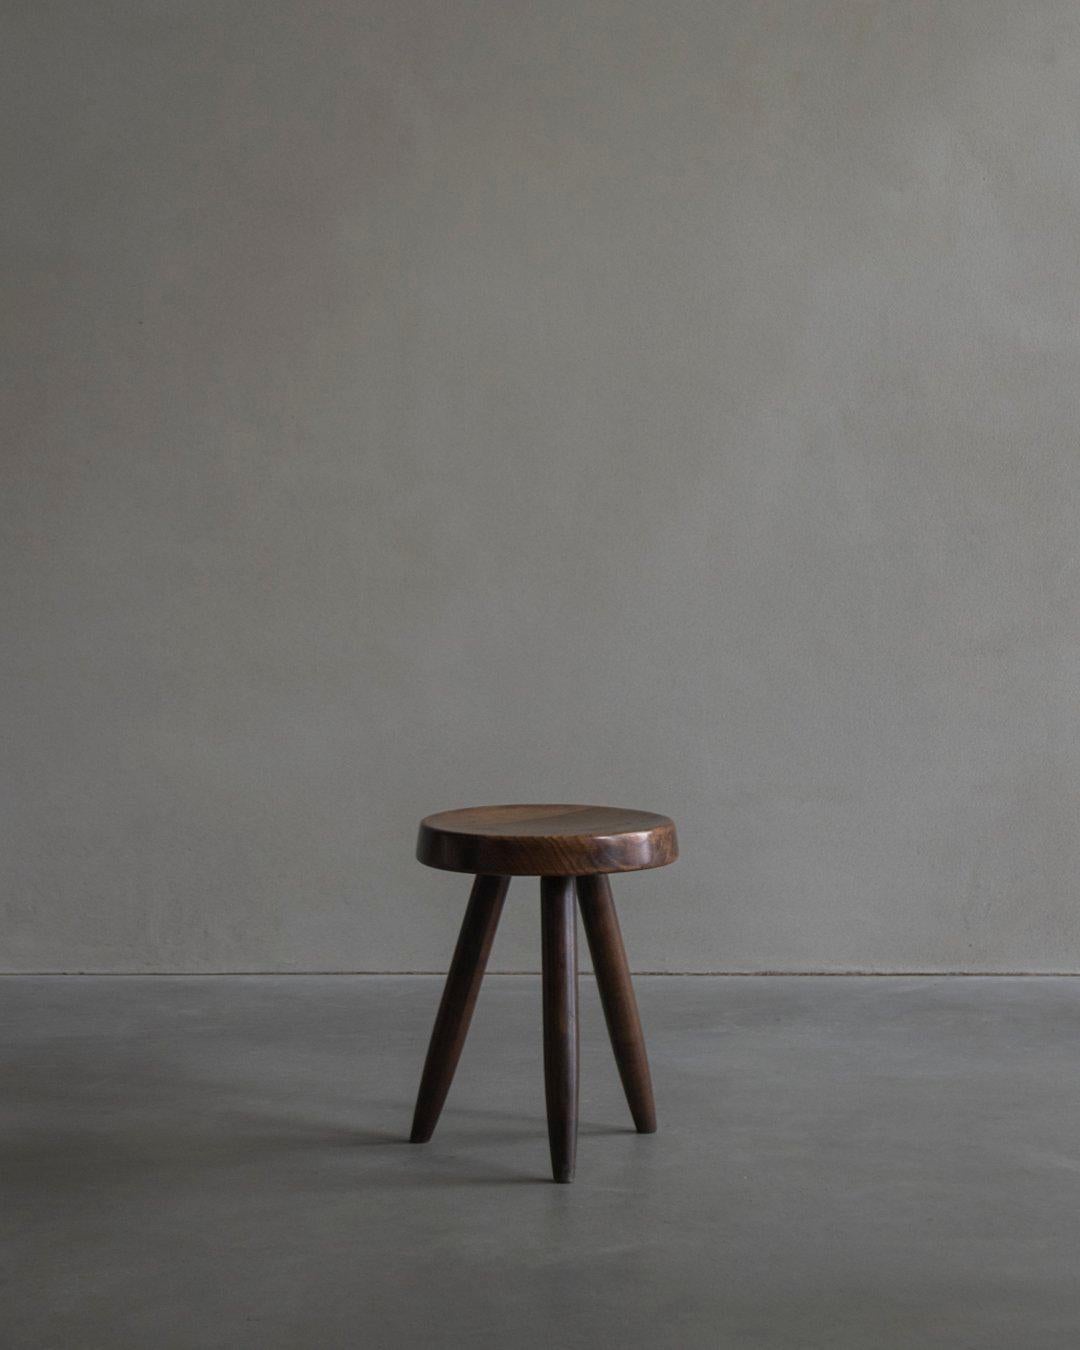 Vintage Berger Stool High - Circa 1950s - Provenance private residence Paris, France

The Berger high stool by Charlotte Perriand probably executed by Robert Sentou. Sentou was a French furniture designer who collaborated with Perriand on several